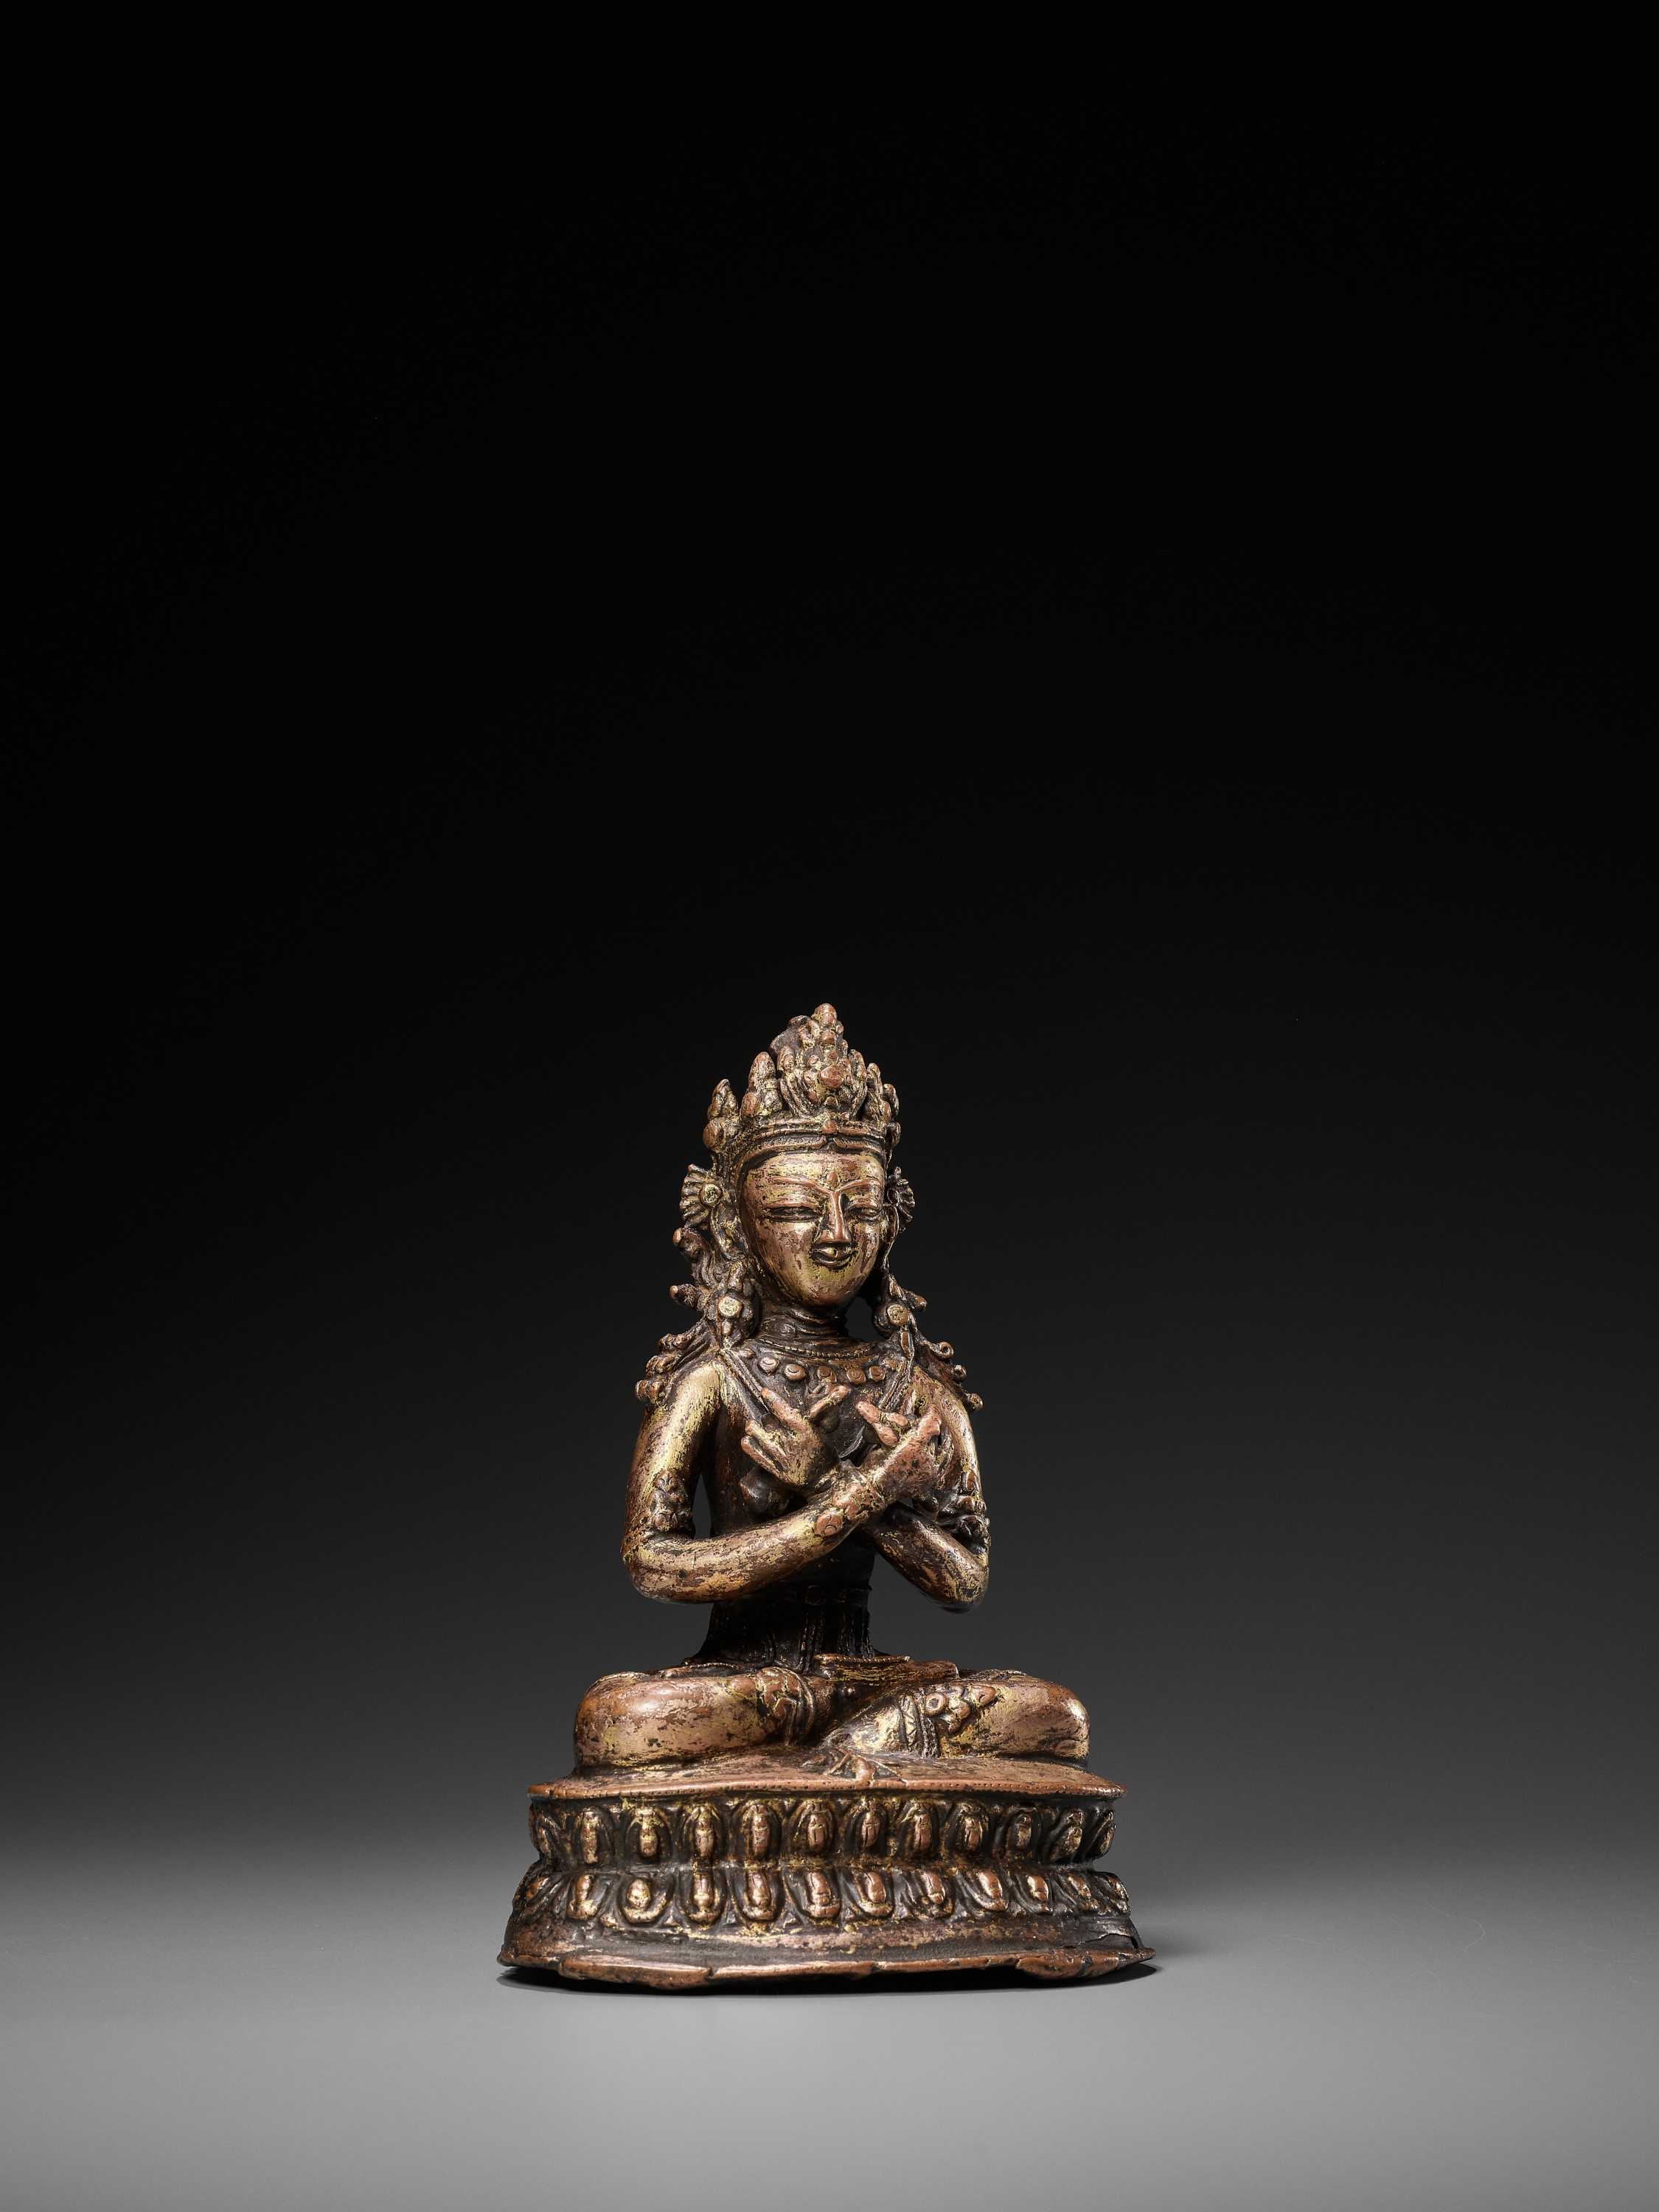 A GILT COPPER-ALLOY FIGURE OF VAJRADHARA, 15th-16TH CENTURY OR EARLIER - Image 12 of 13